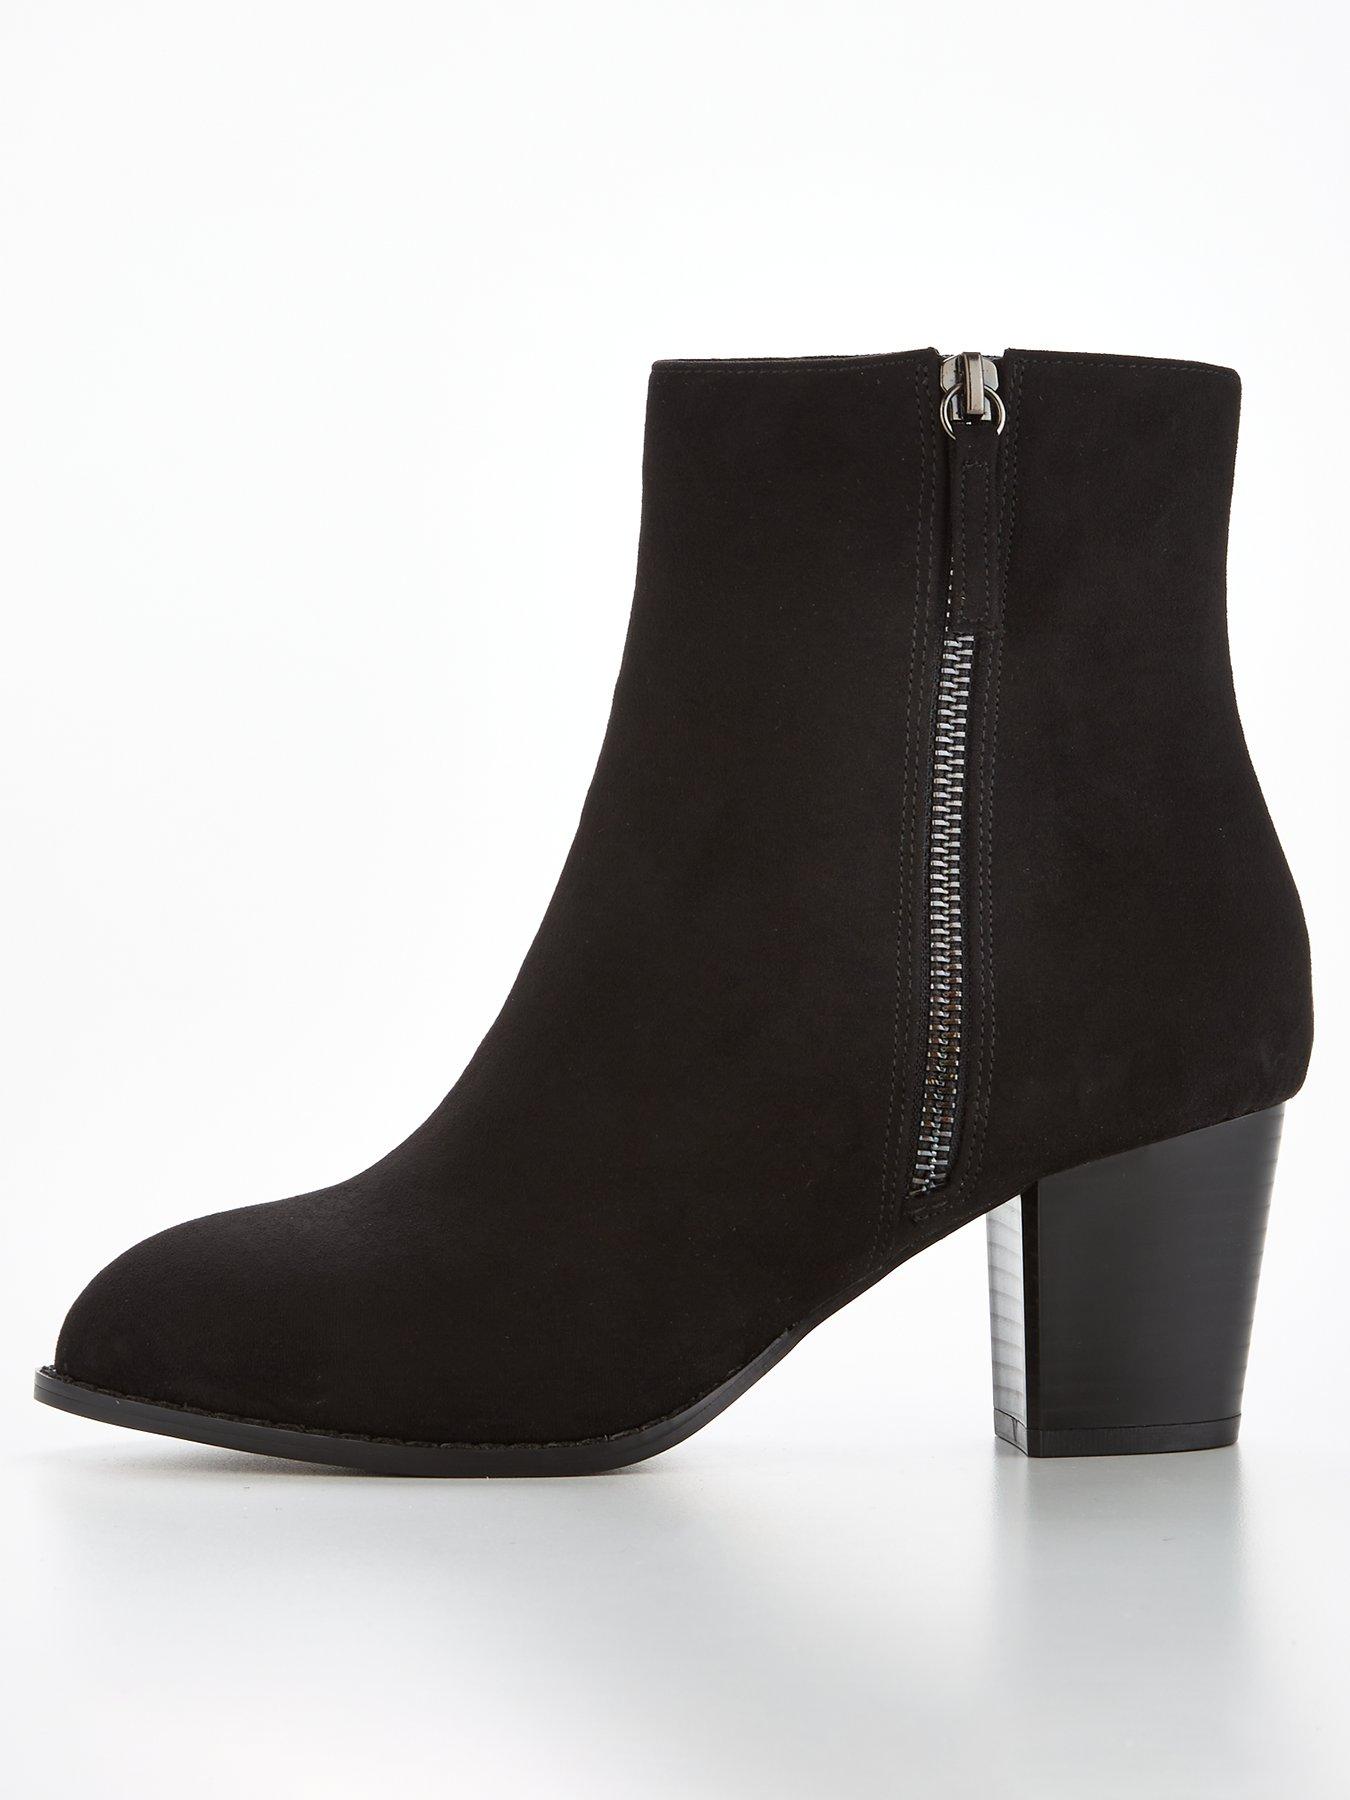 Womens Ankle Boots | Heeled & Leather Boots | Next UK